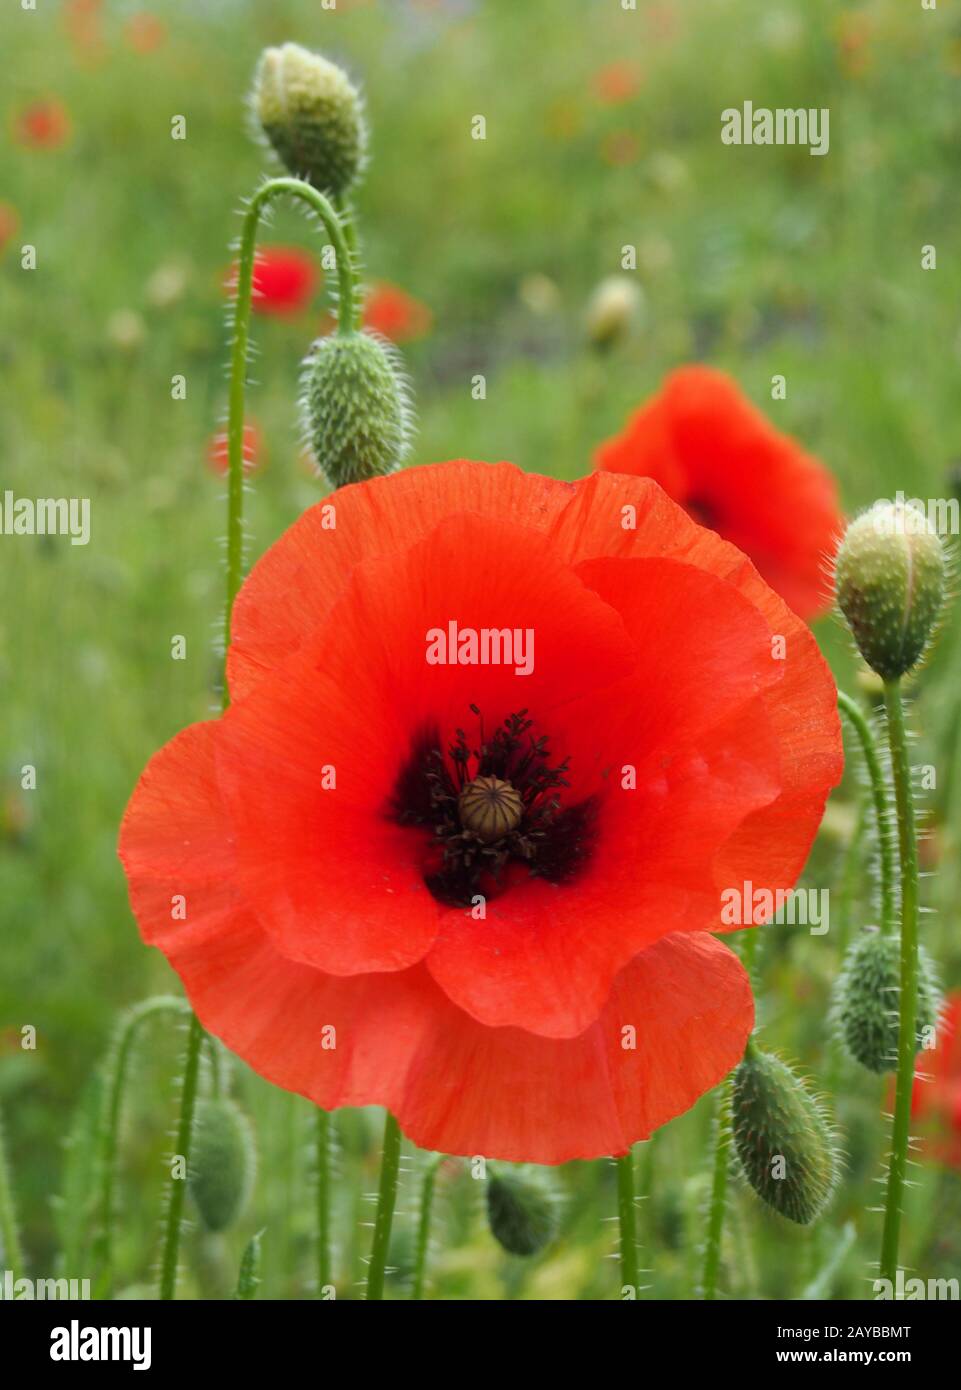 the flower of a red common poppy with buds with a blurred summer meadow background Stock Photo